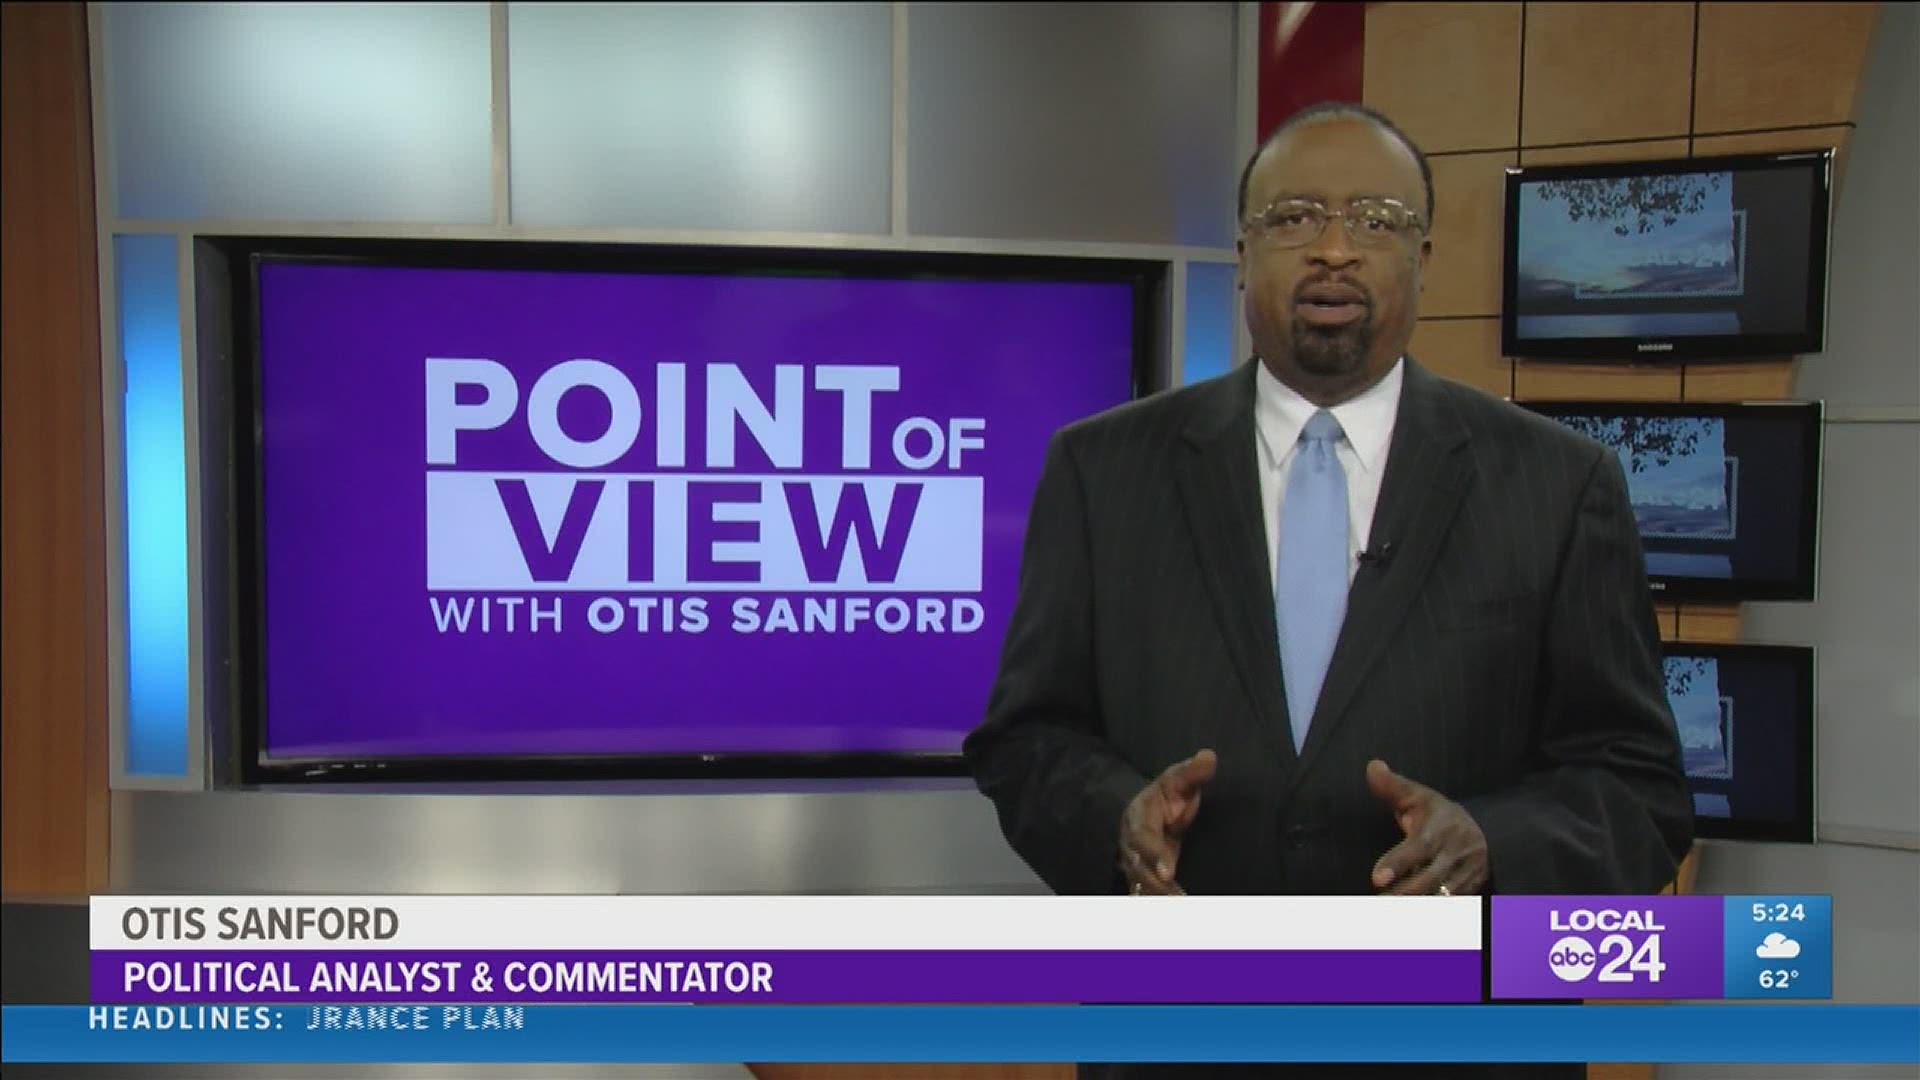 Local 24 News political analyst and commentator Otis Sanford shares his point of view on mask mandates for West Tennessee counties.